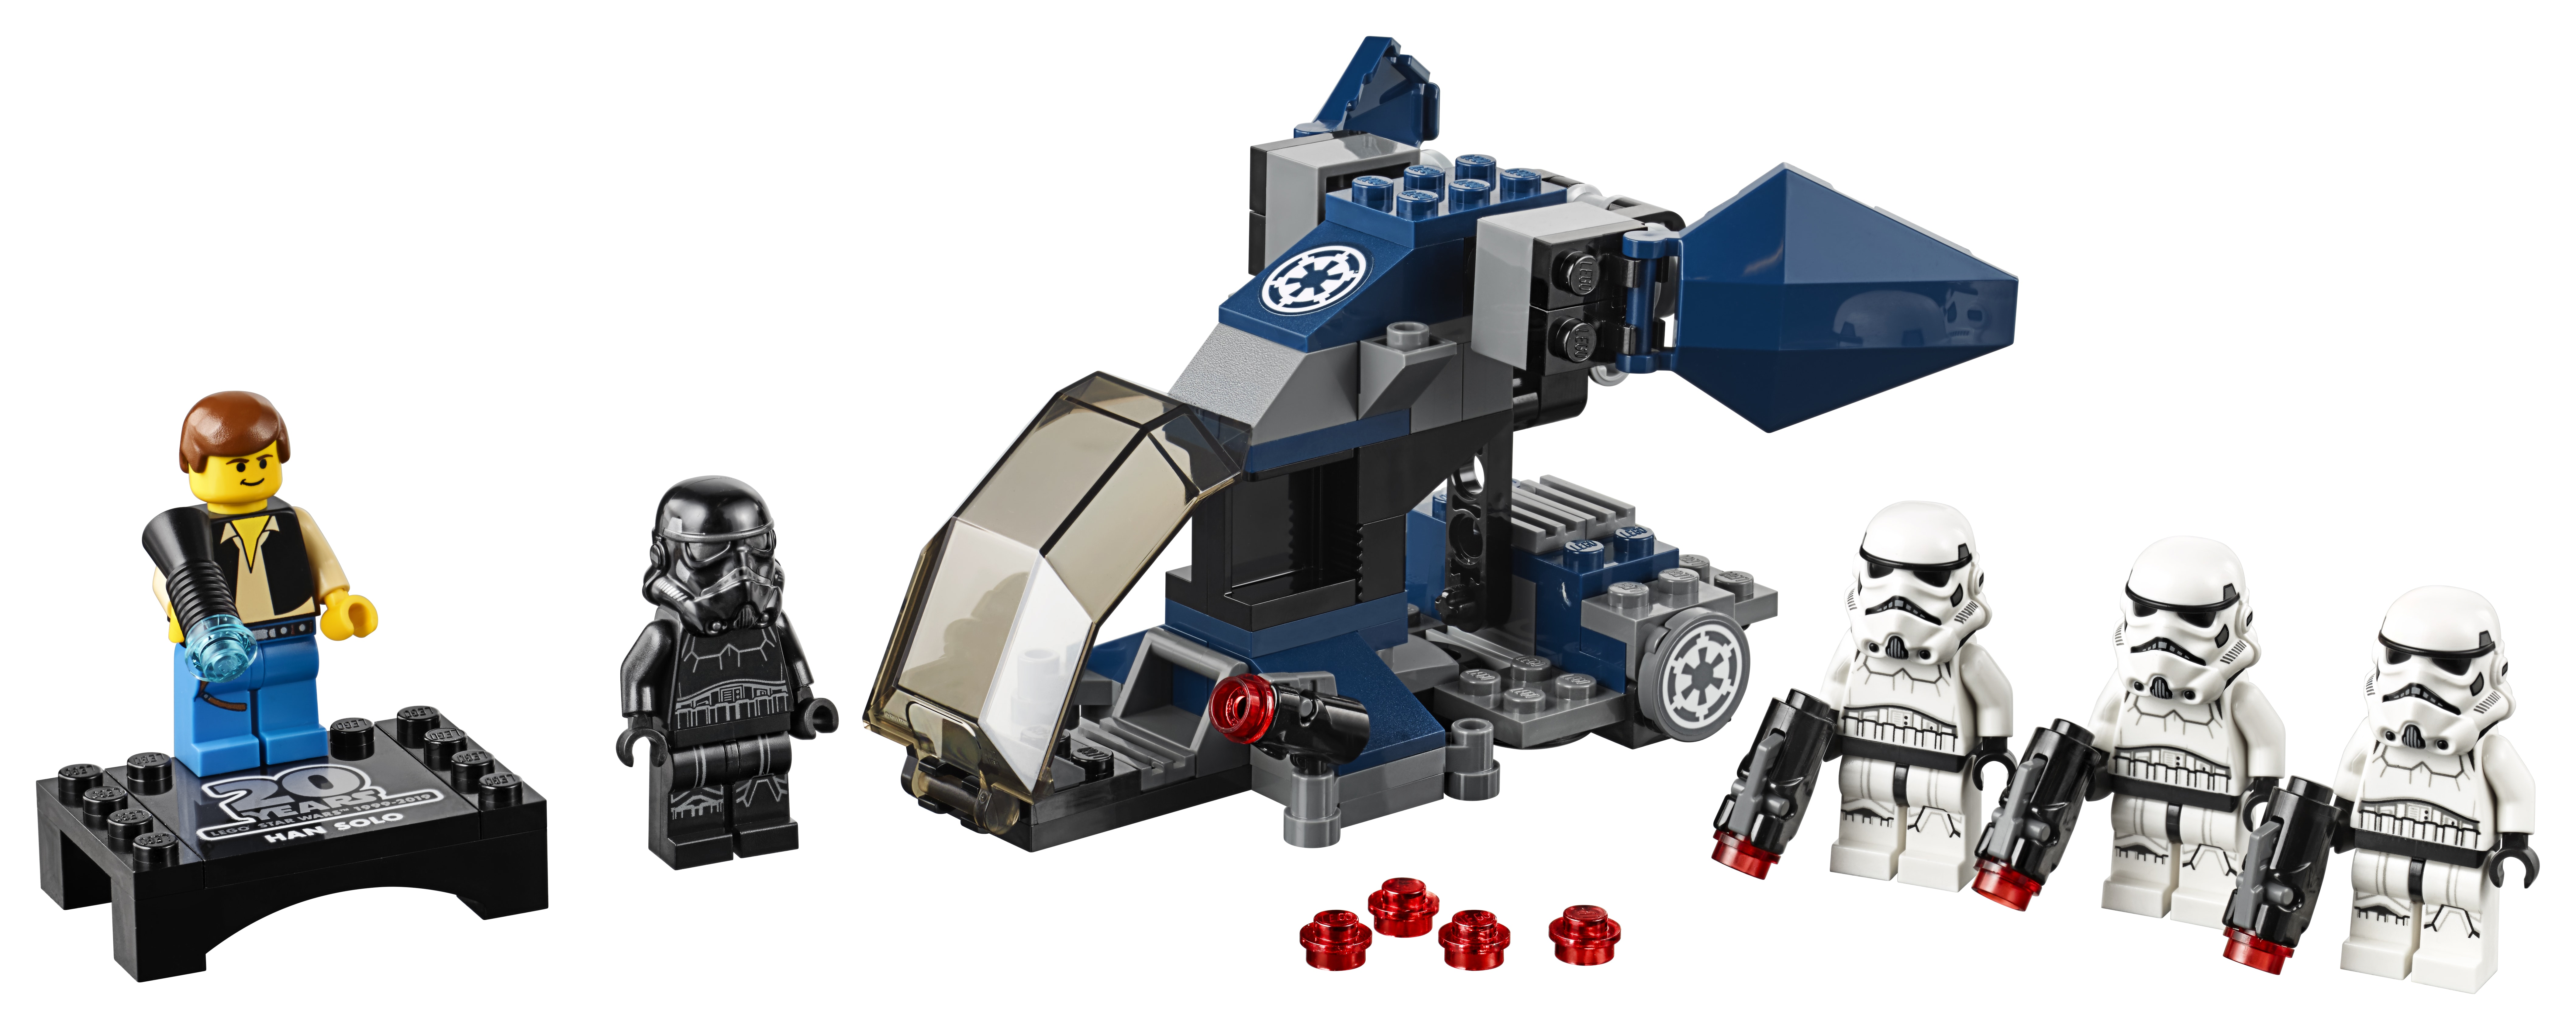 LEGO Star Wars Imperial Dropship – 20th Anniversary Edition